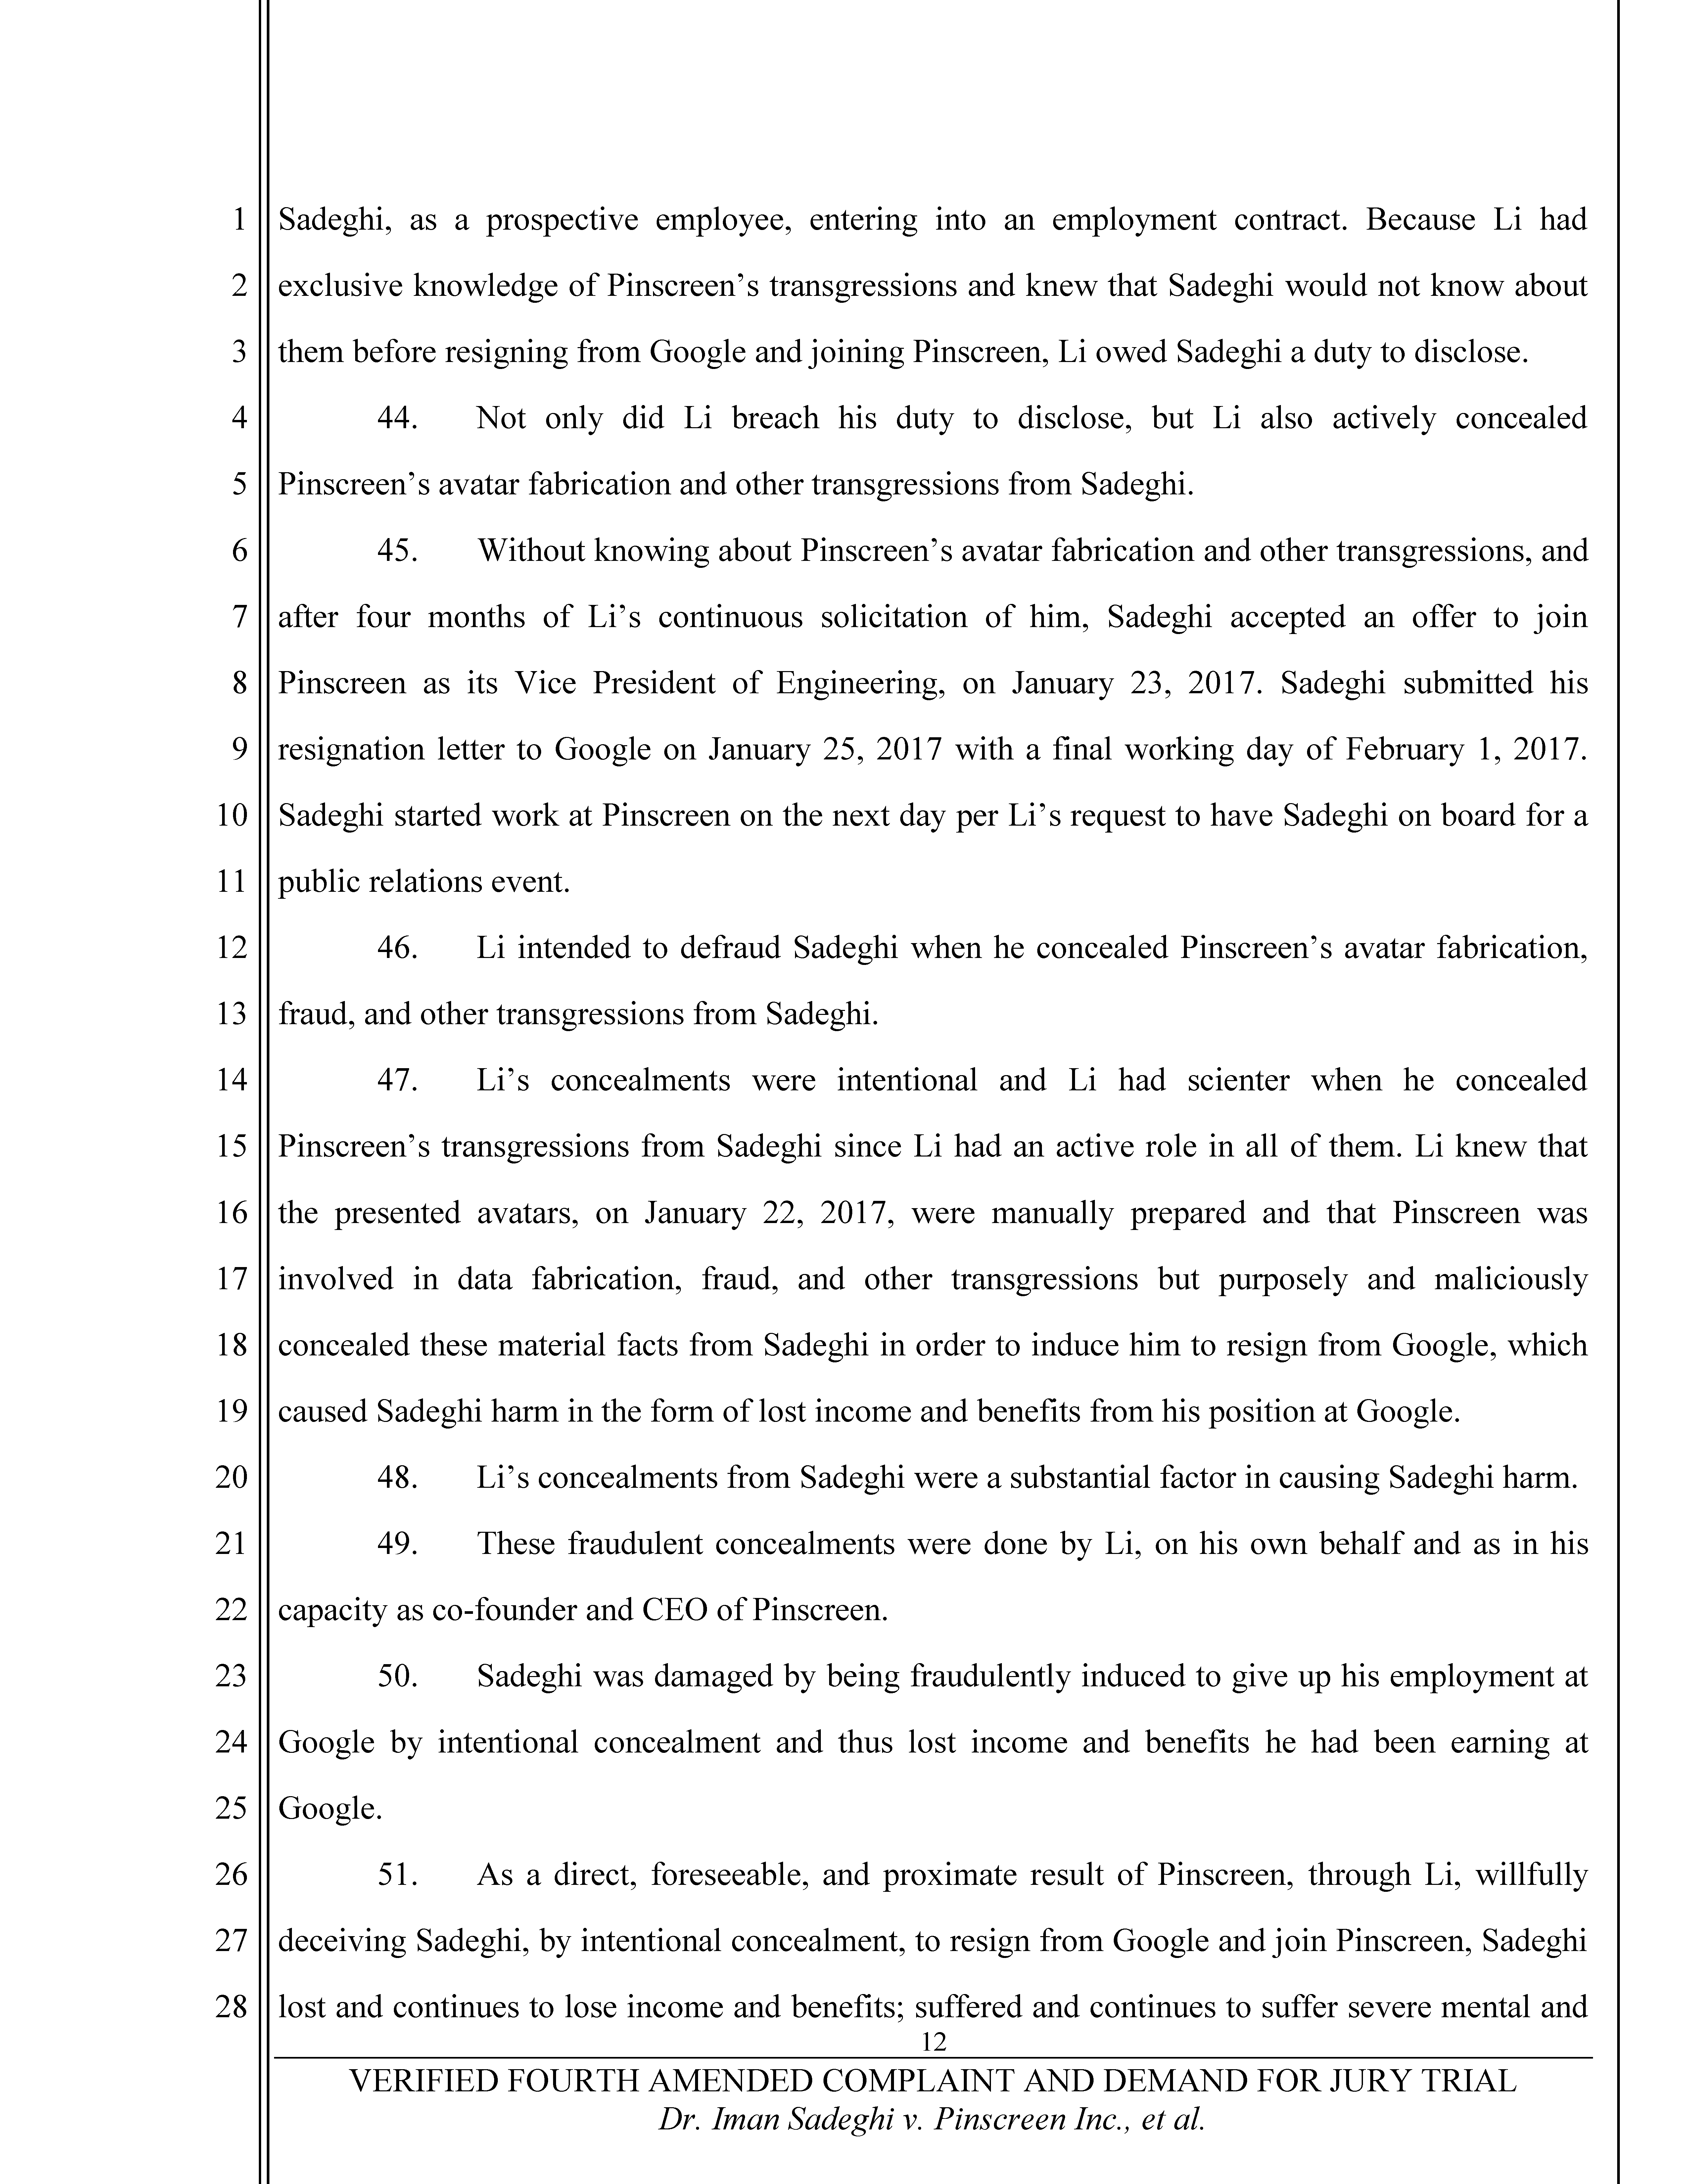 Fourth Amended Complaint (4AC) Page 13